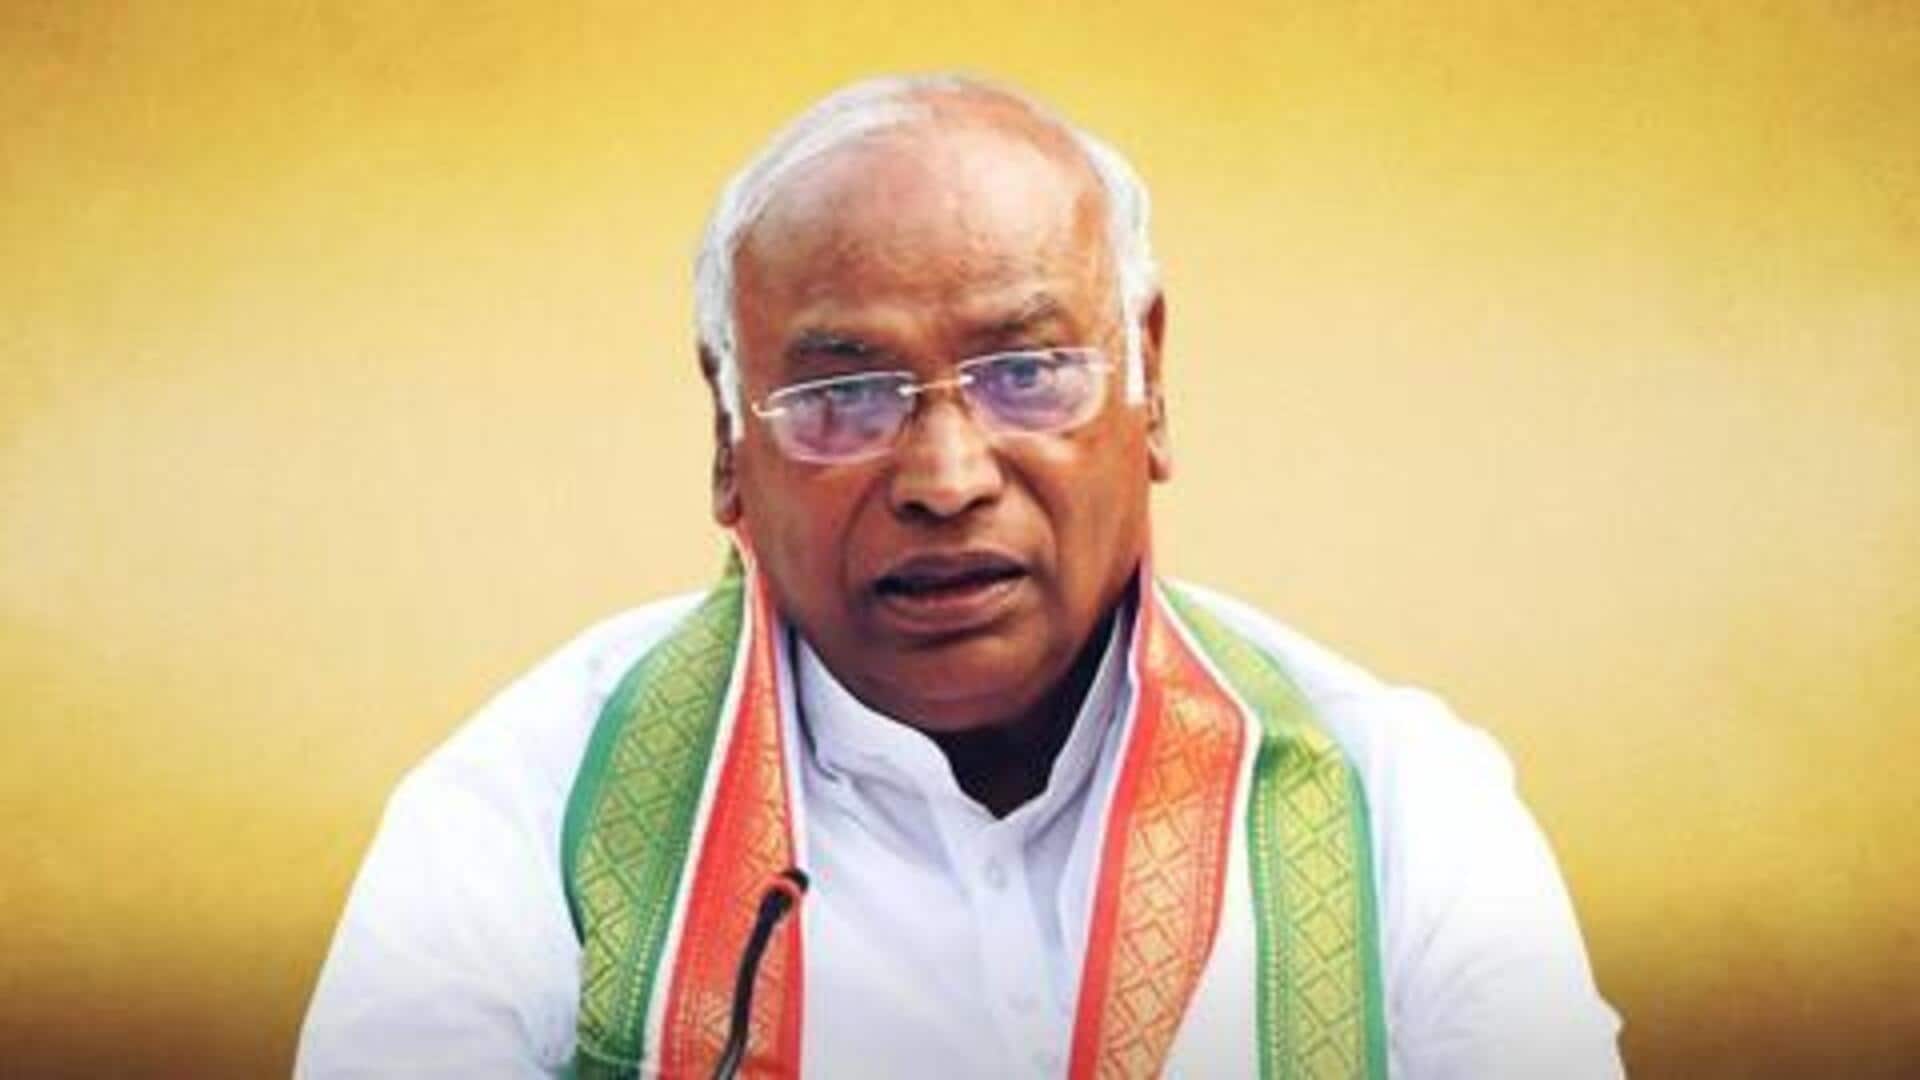 Foundational pillars of Constitution under attack from govt itself: Kharge